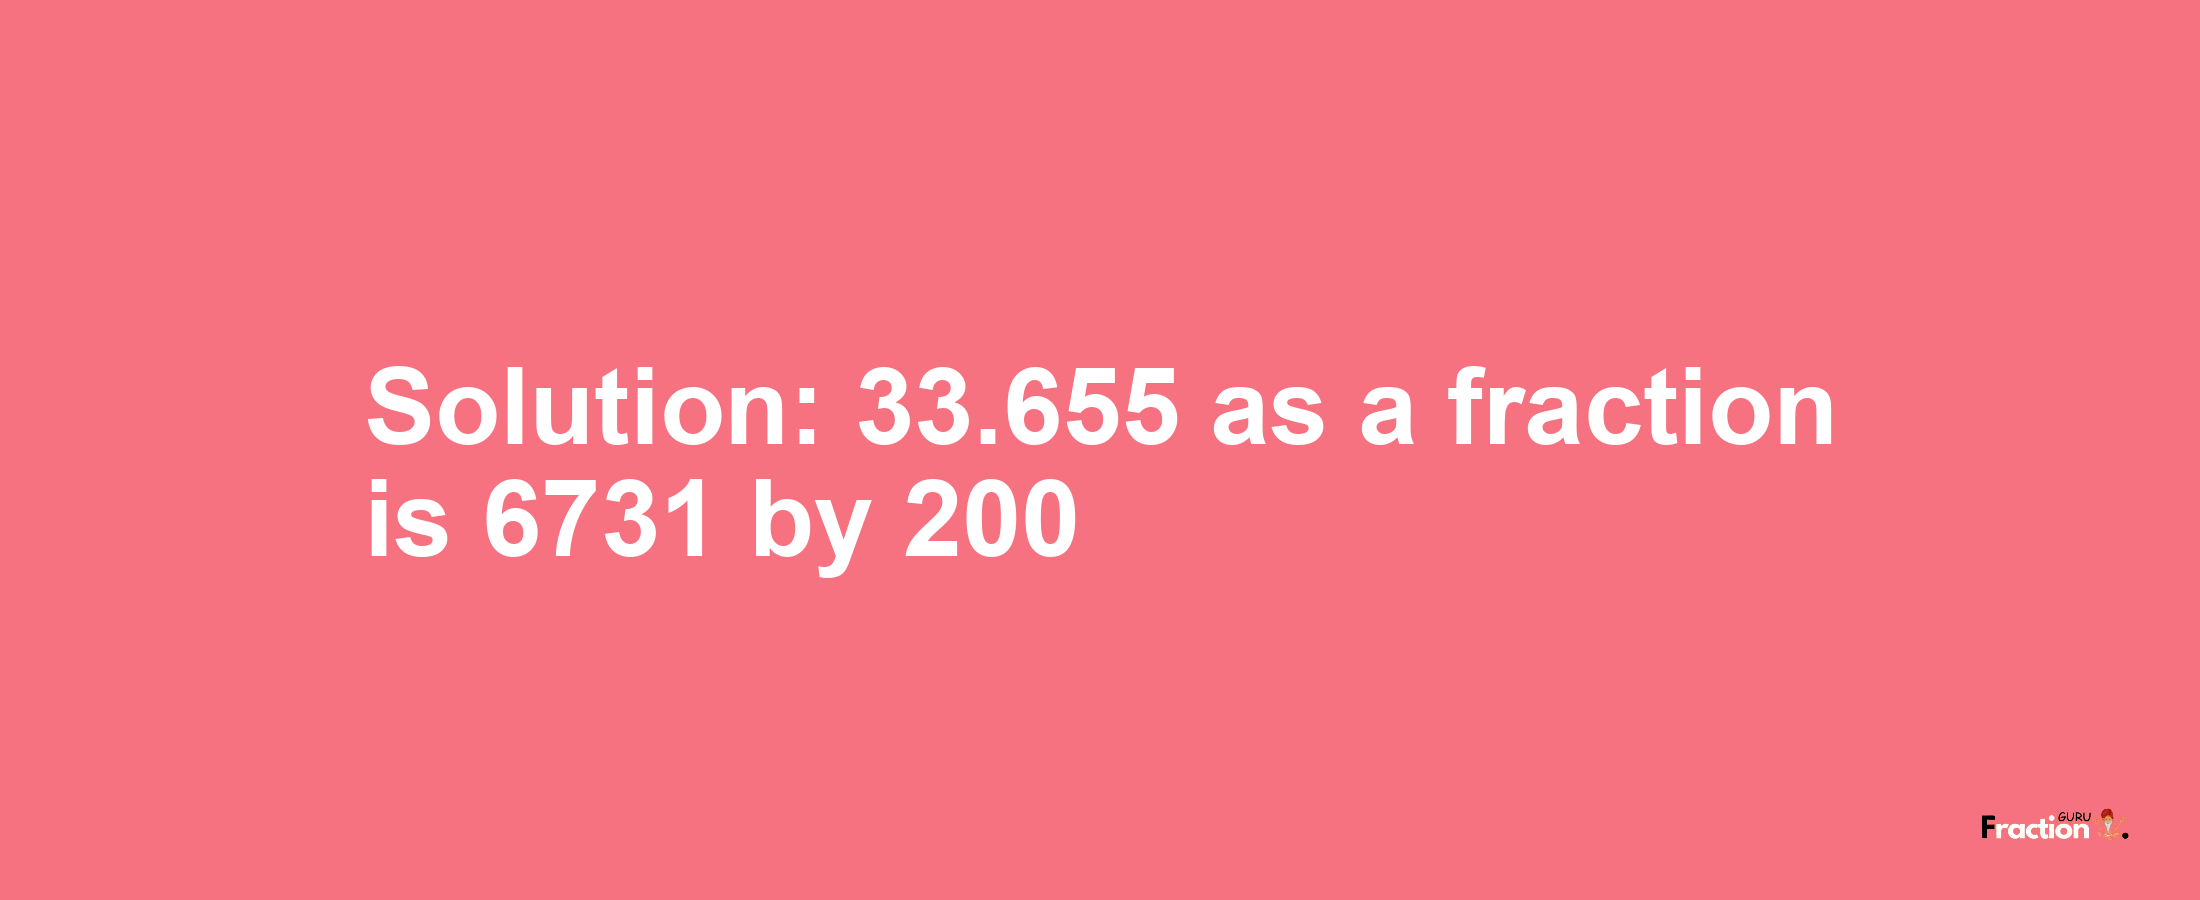 Solution:33.655 as a fraction is 6731/200